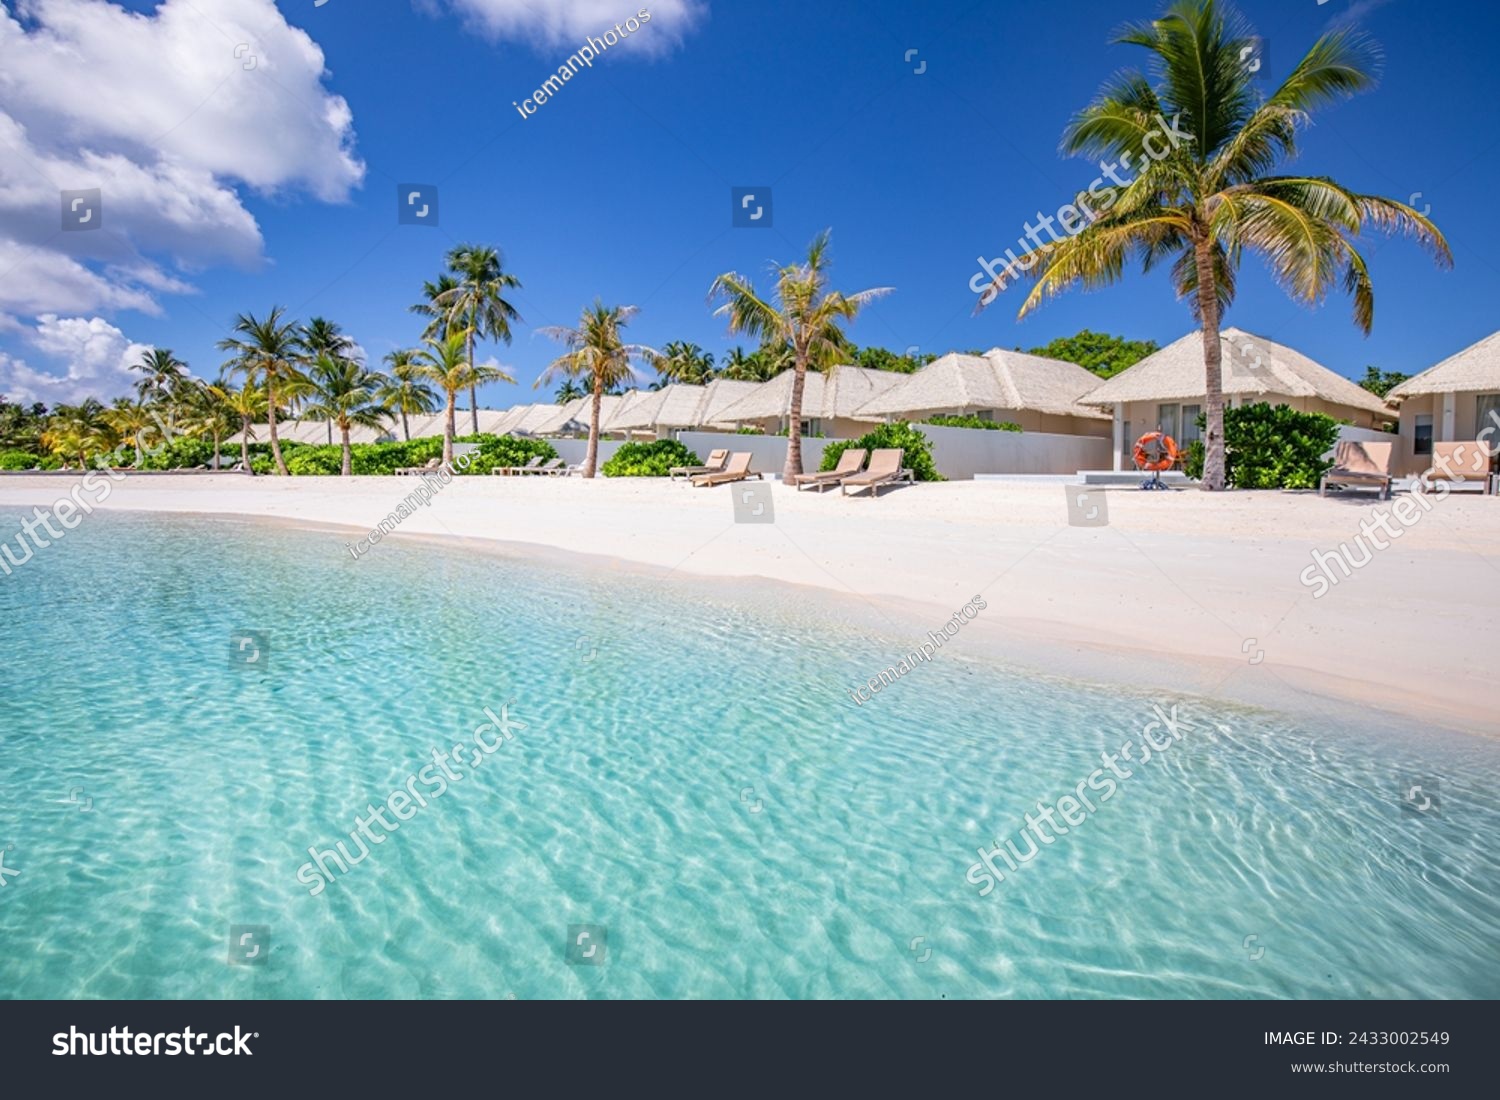 Beach villas in Maldives, luxury summer travel and vacation background. Amazing blue sea and palm trees under blue sky. Tropical landscape and exotic beach. Summer holiday or honeymoon destination
 #2433002549